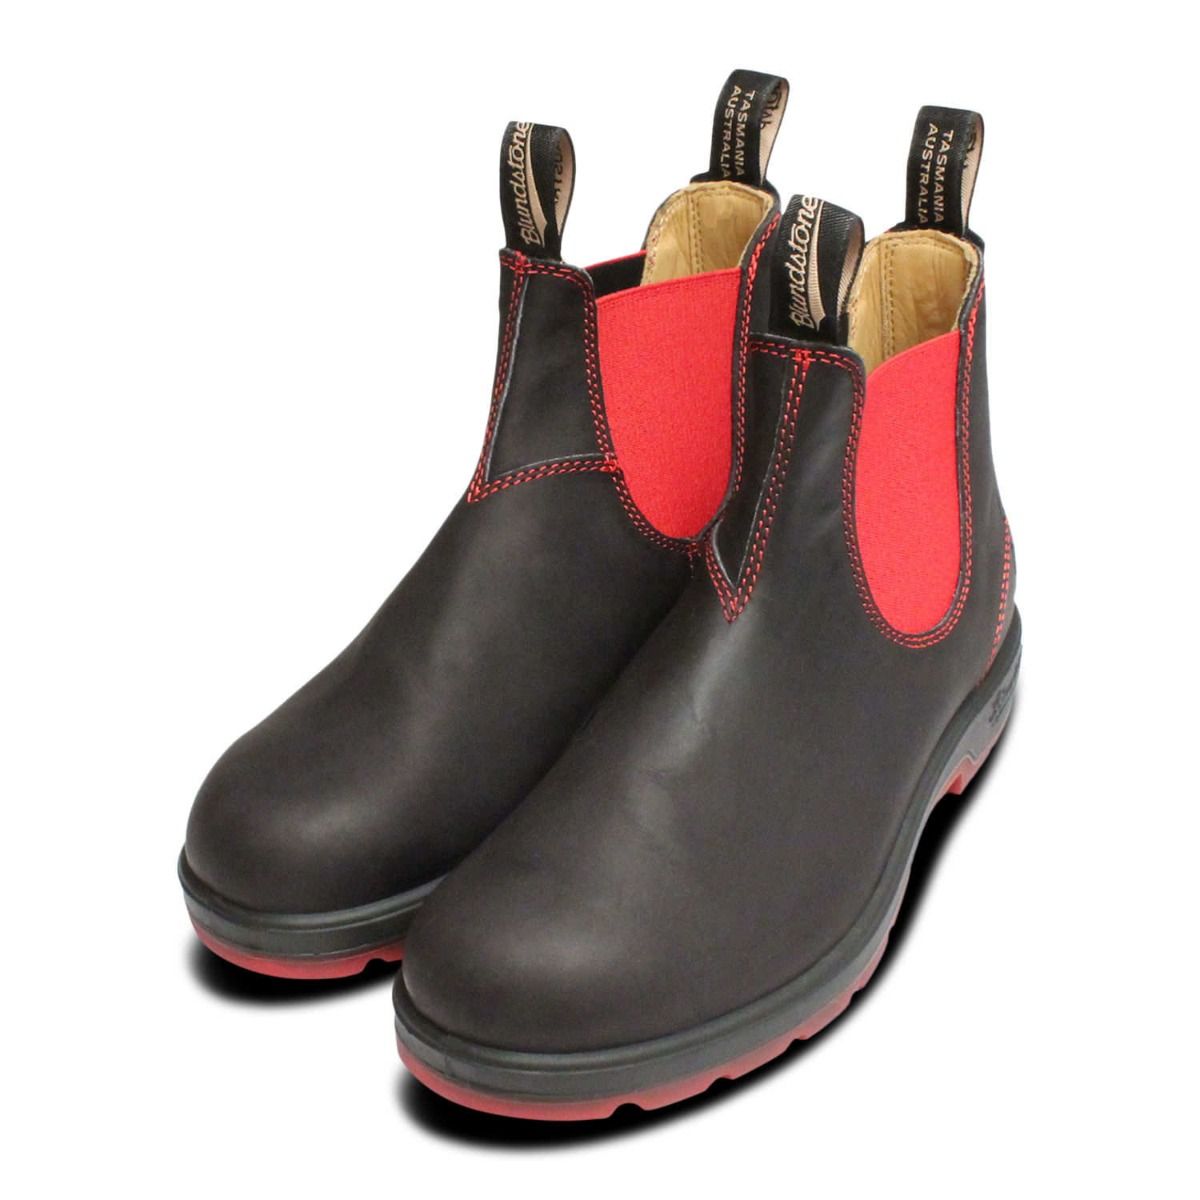 blundstone black and red